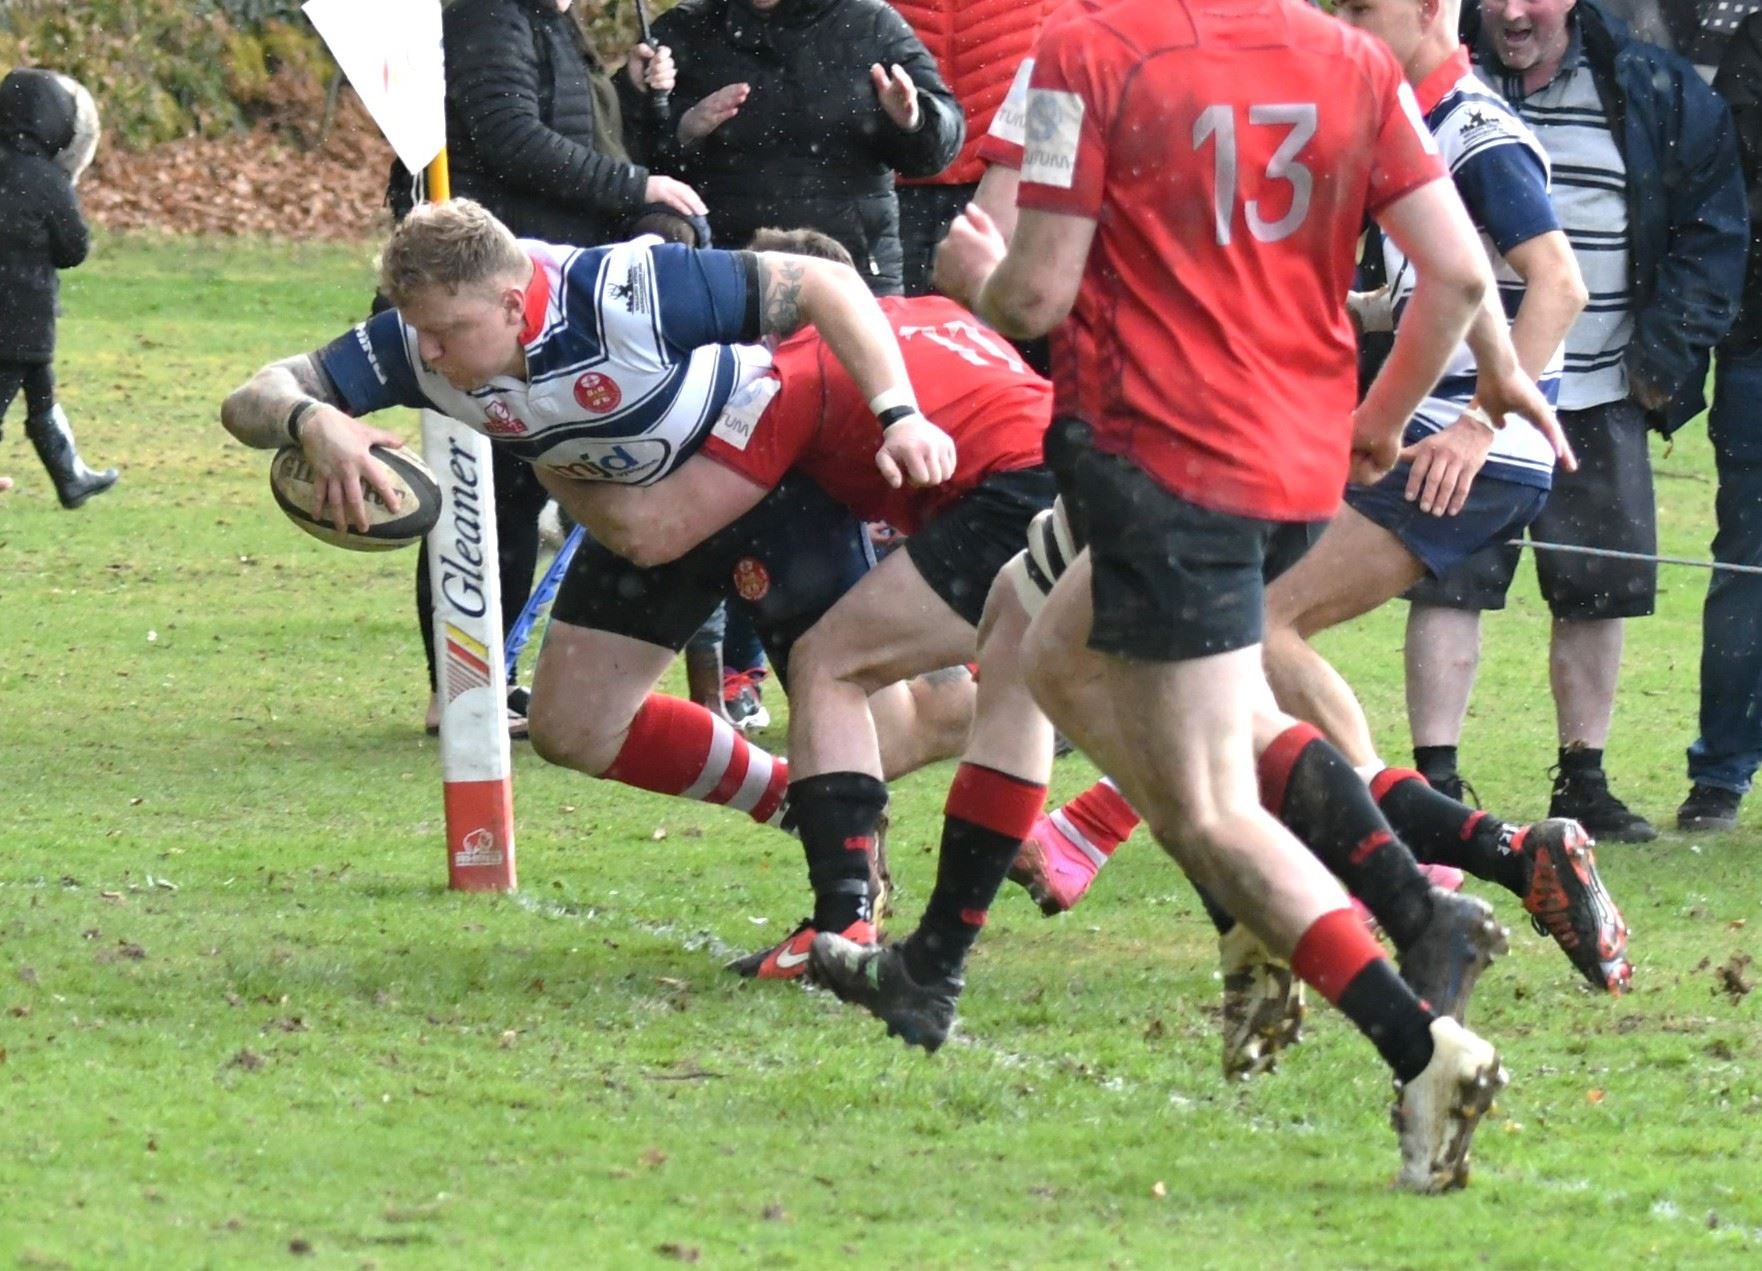 A vital score in the thrilling semi-final victory over Linlithgow. Picture: James Officer